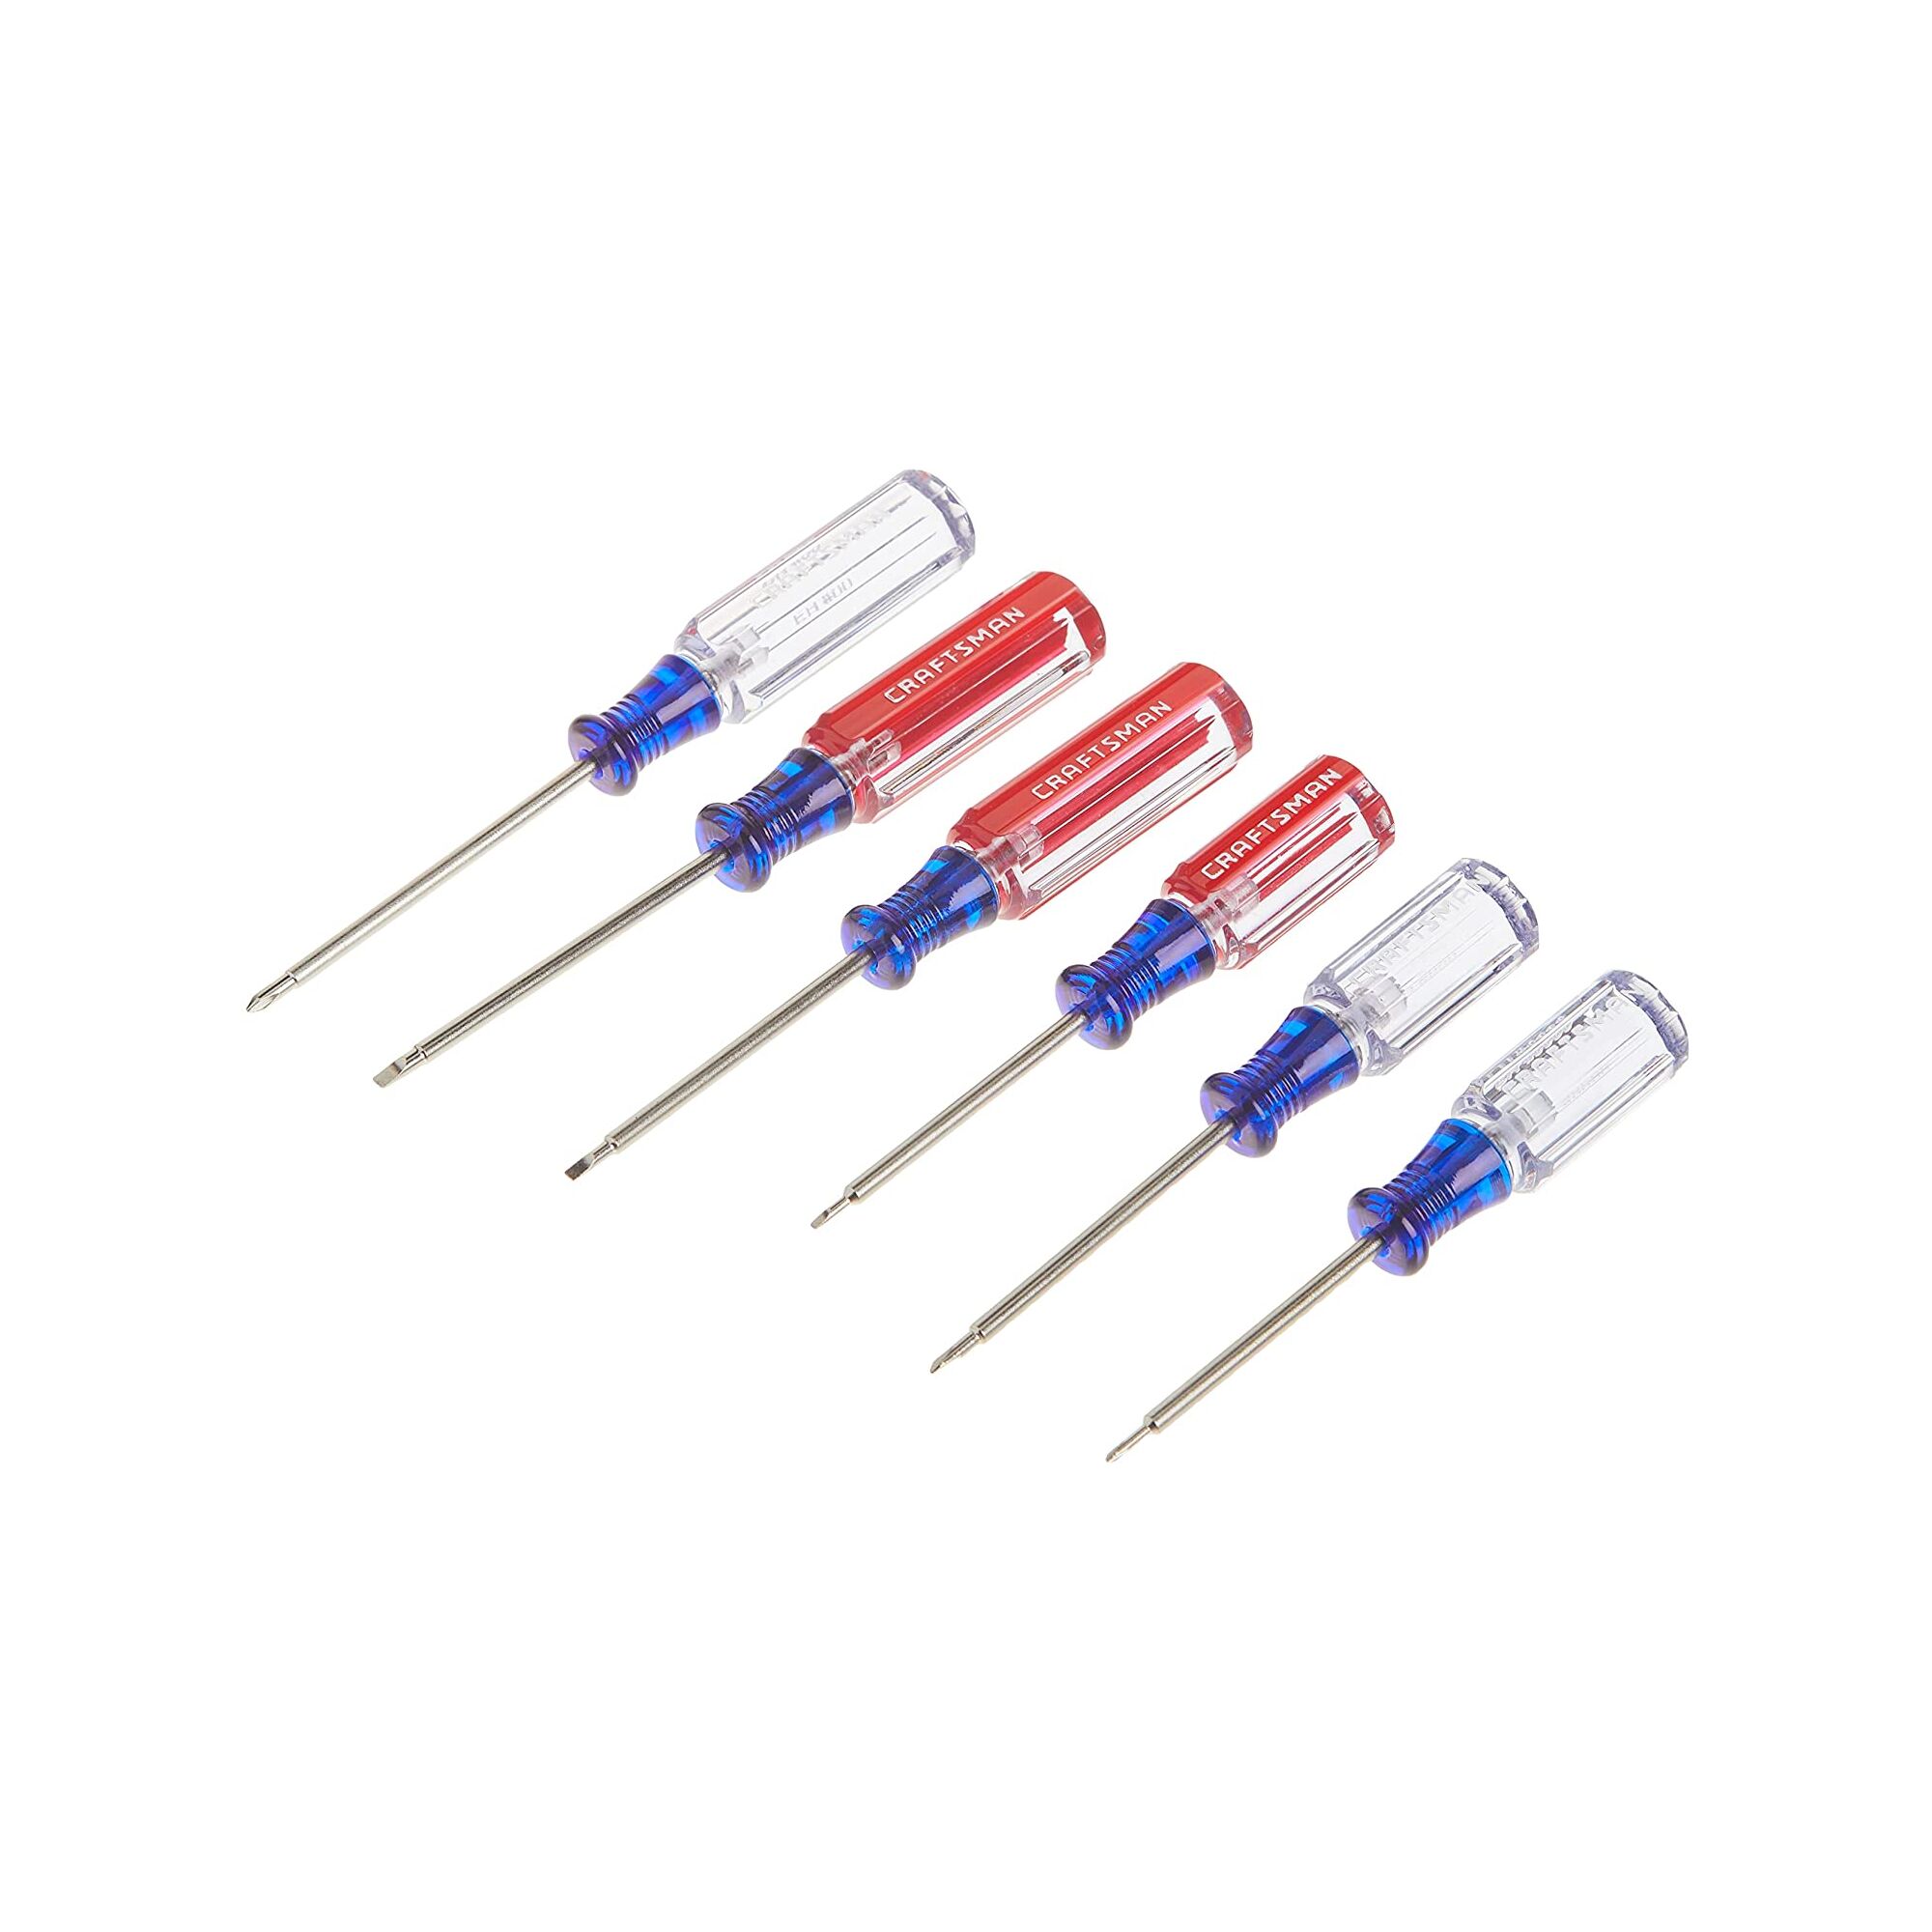 View of CRAFTSMAN Screwdrivers: Set on white background